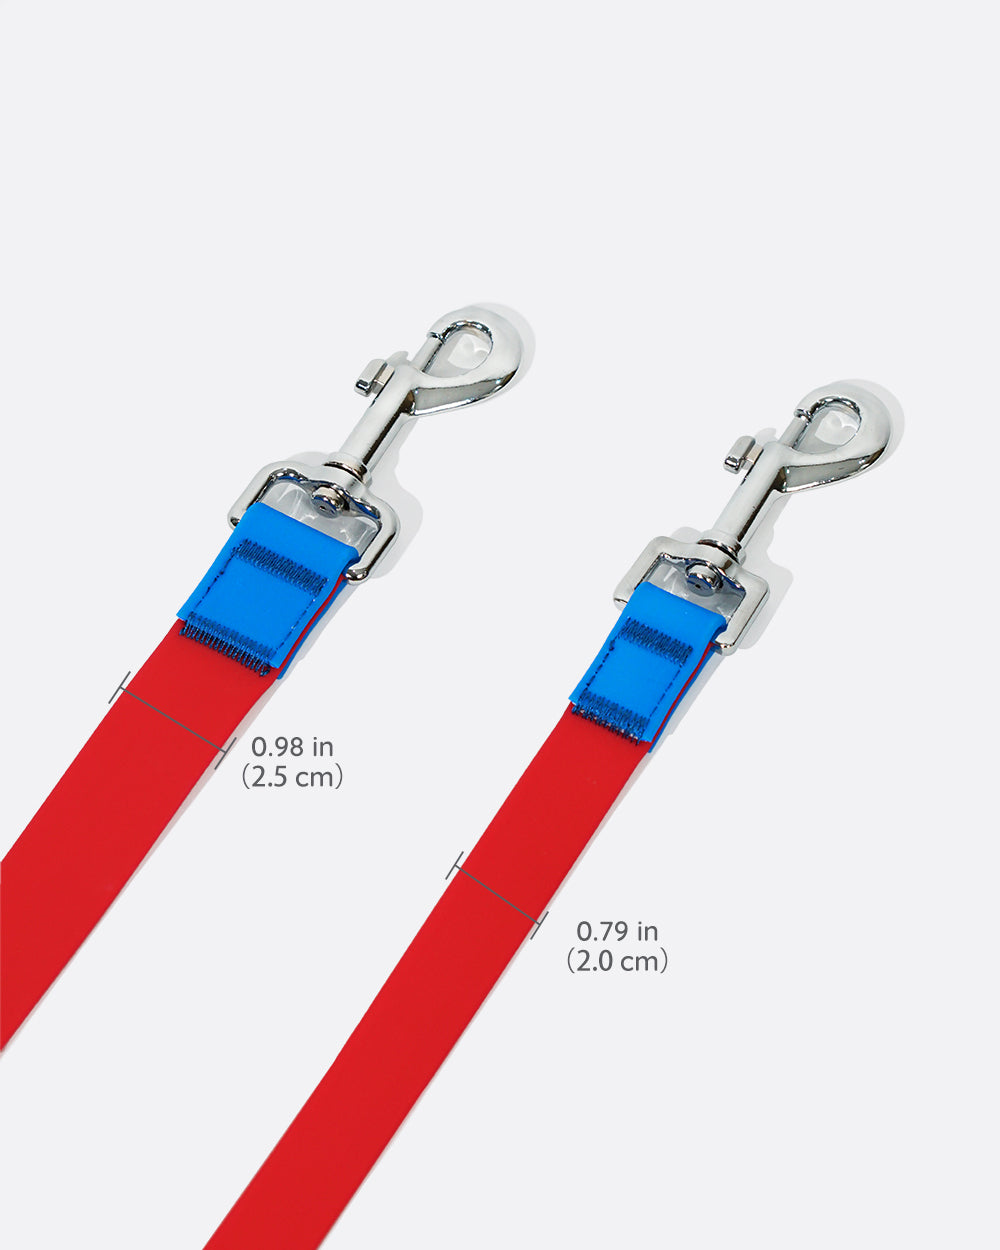 A PVC waterproof dog leash with a 5 ft length, featuring a 360° rotating metal clasp, available in two width specifications: 2cm and 2.5 cm.